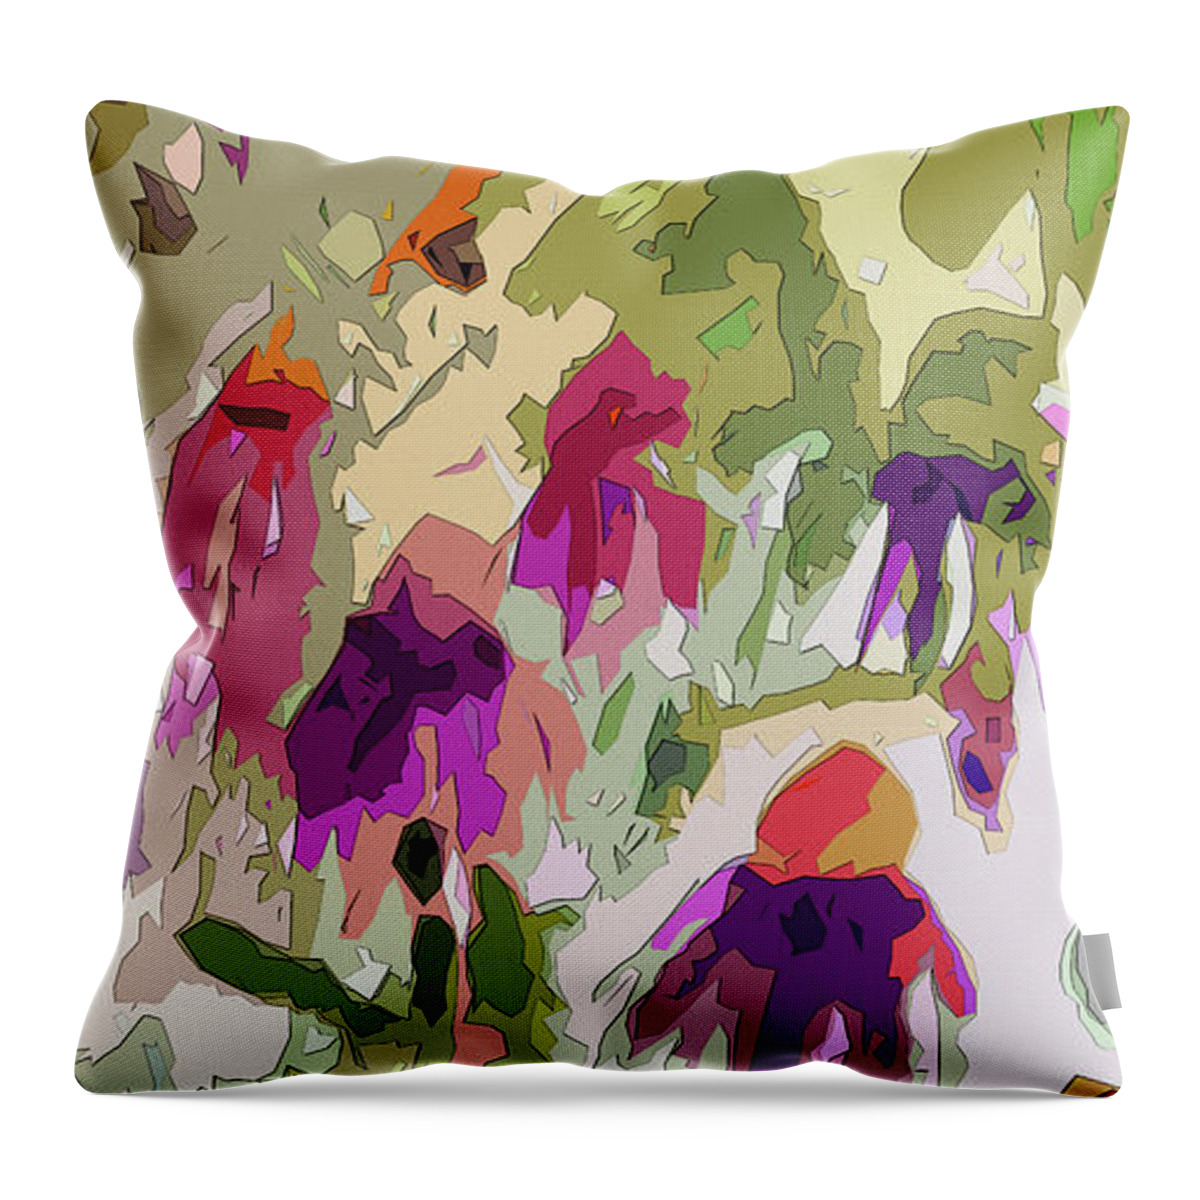 Abstract Throw Pillow featuring the painting Floral Abstract Echinecea Tetraptych 2 by Ginette Callaway